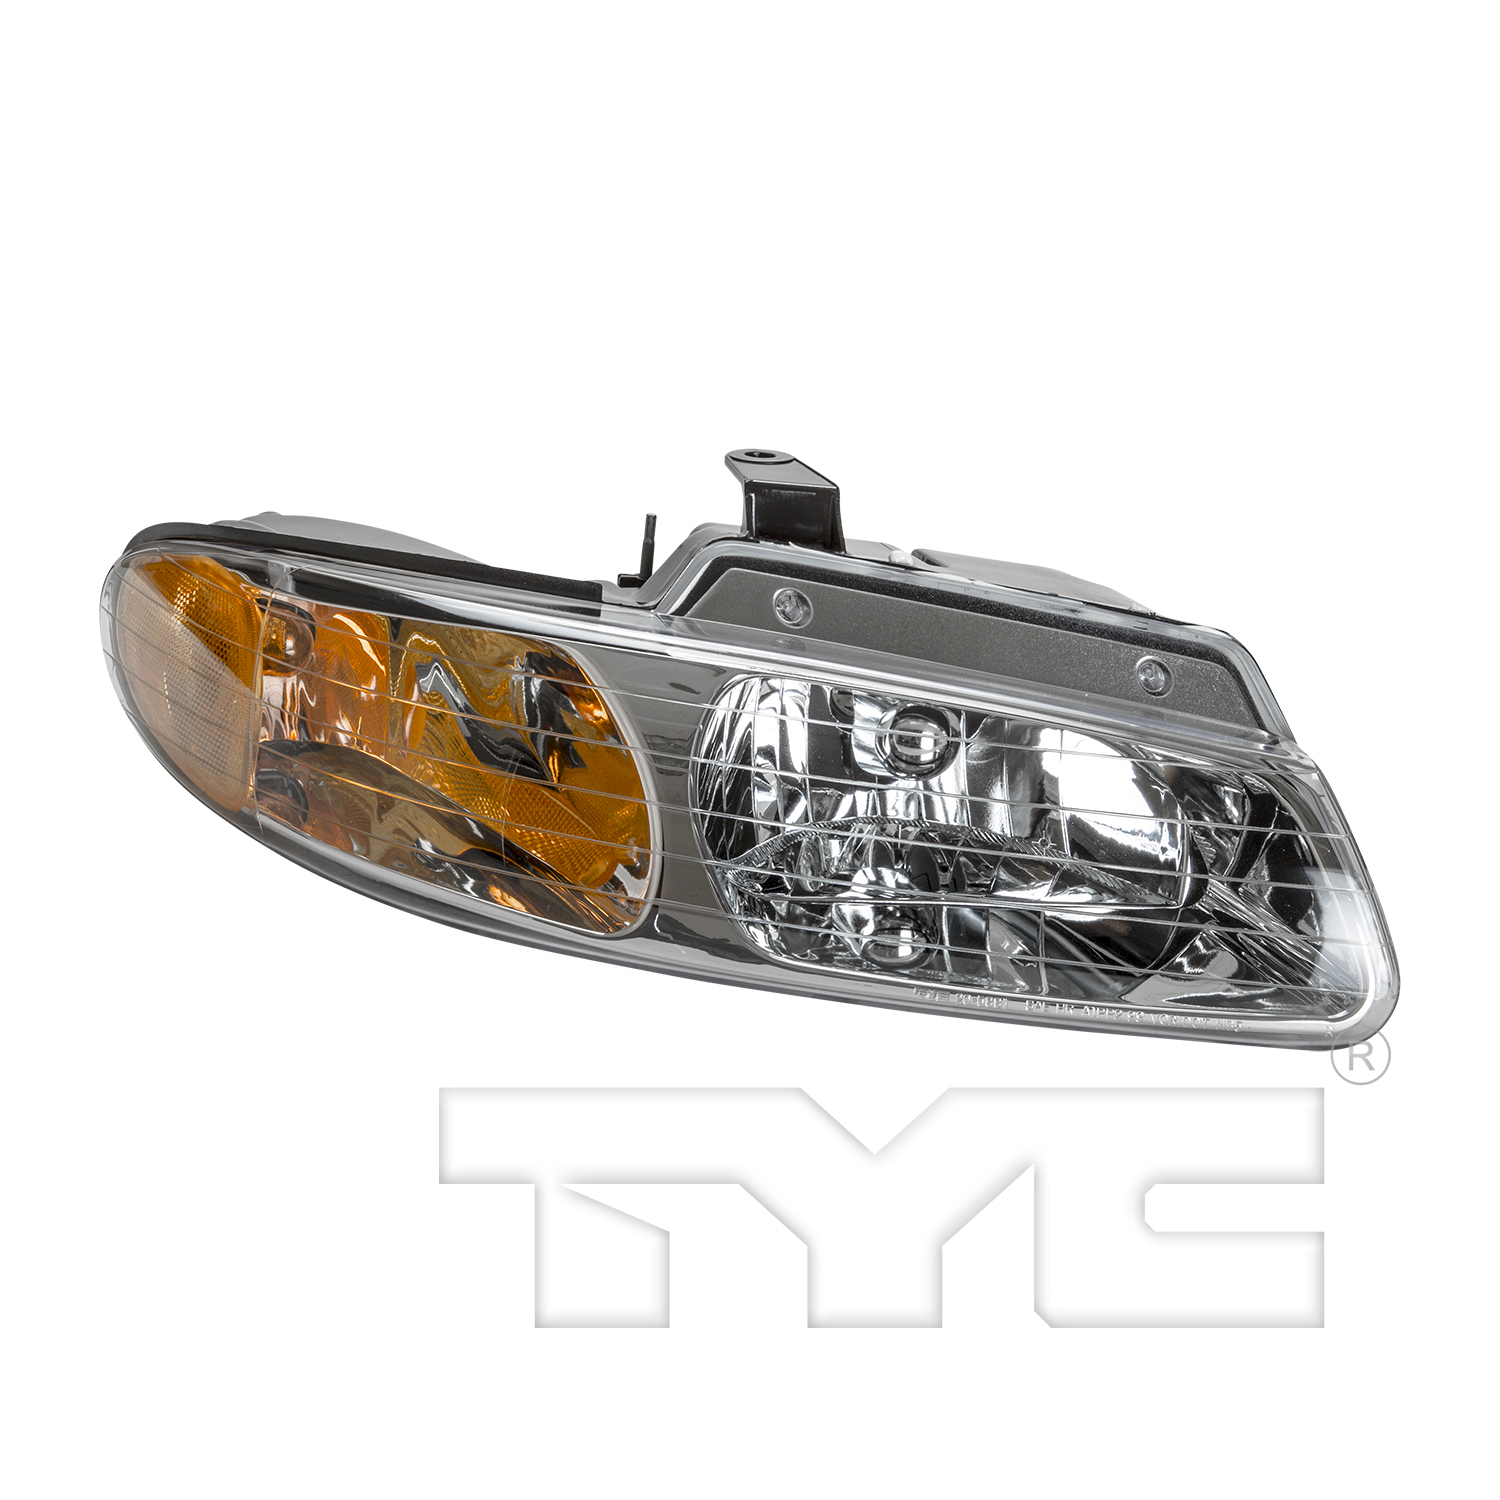 Aftermarket HEADLIGHTS for PLYMOUTH - VOYAGER, VOYAGER,00-00,RT Headlamp assy composite